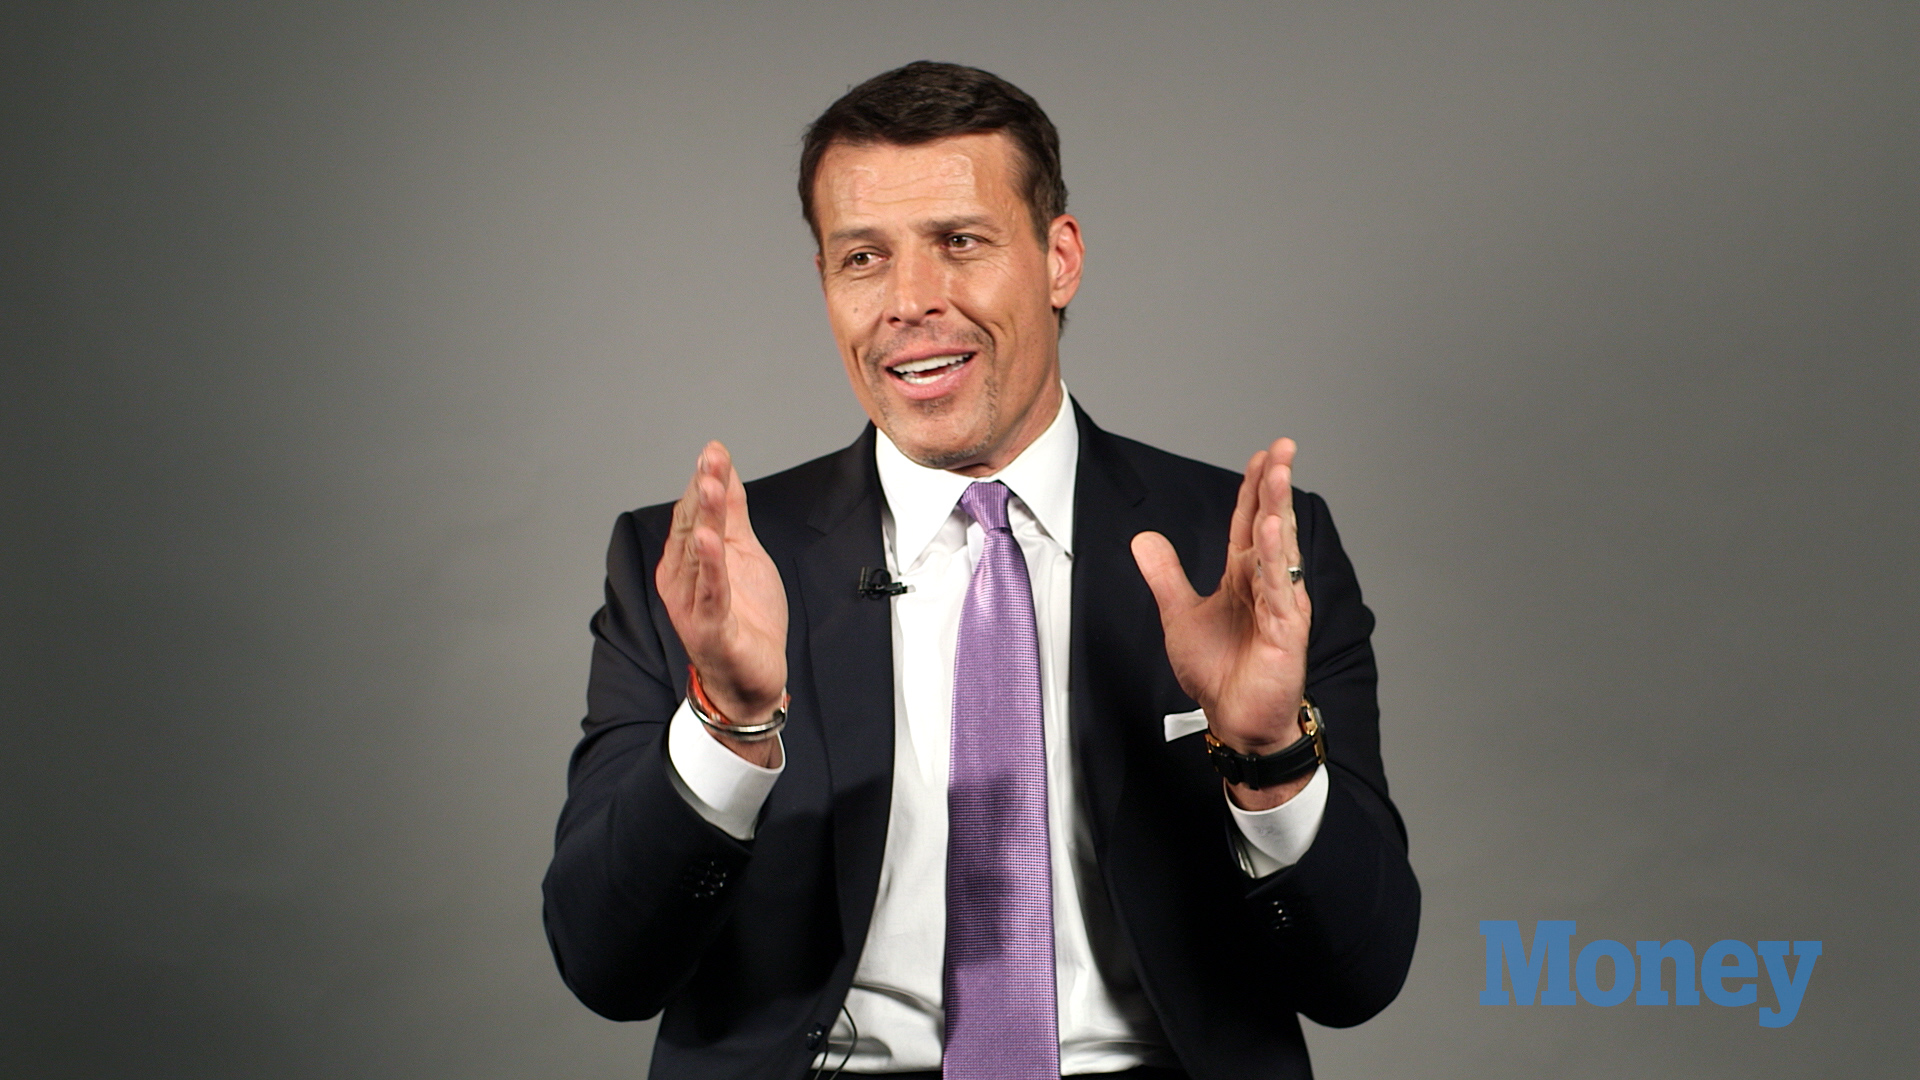 Tony Robbins Shares the Best Financial Advice He Ever Got